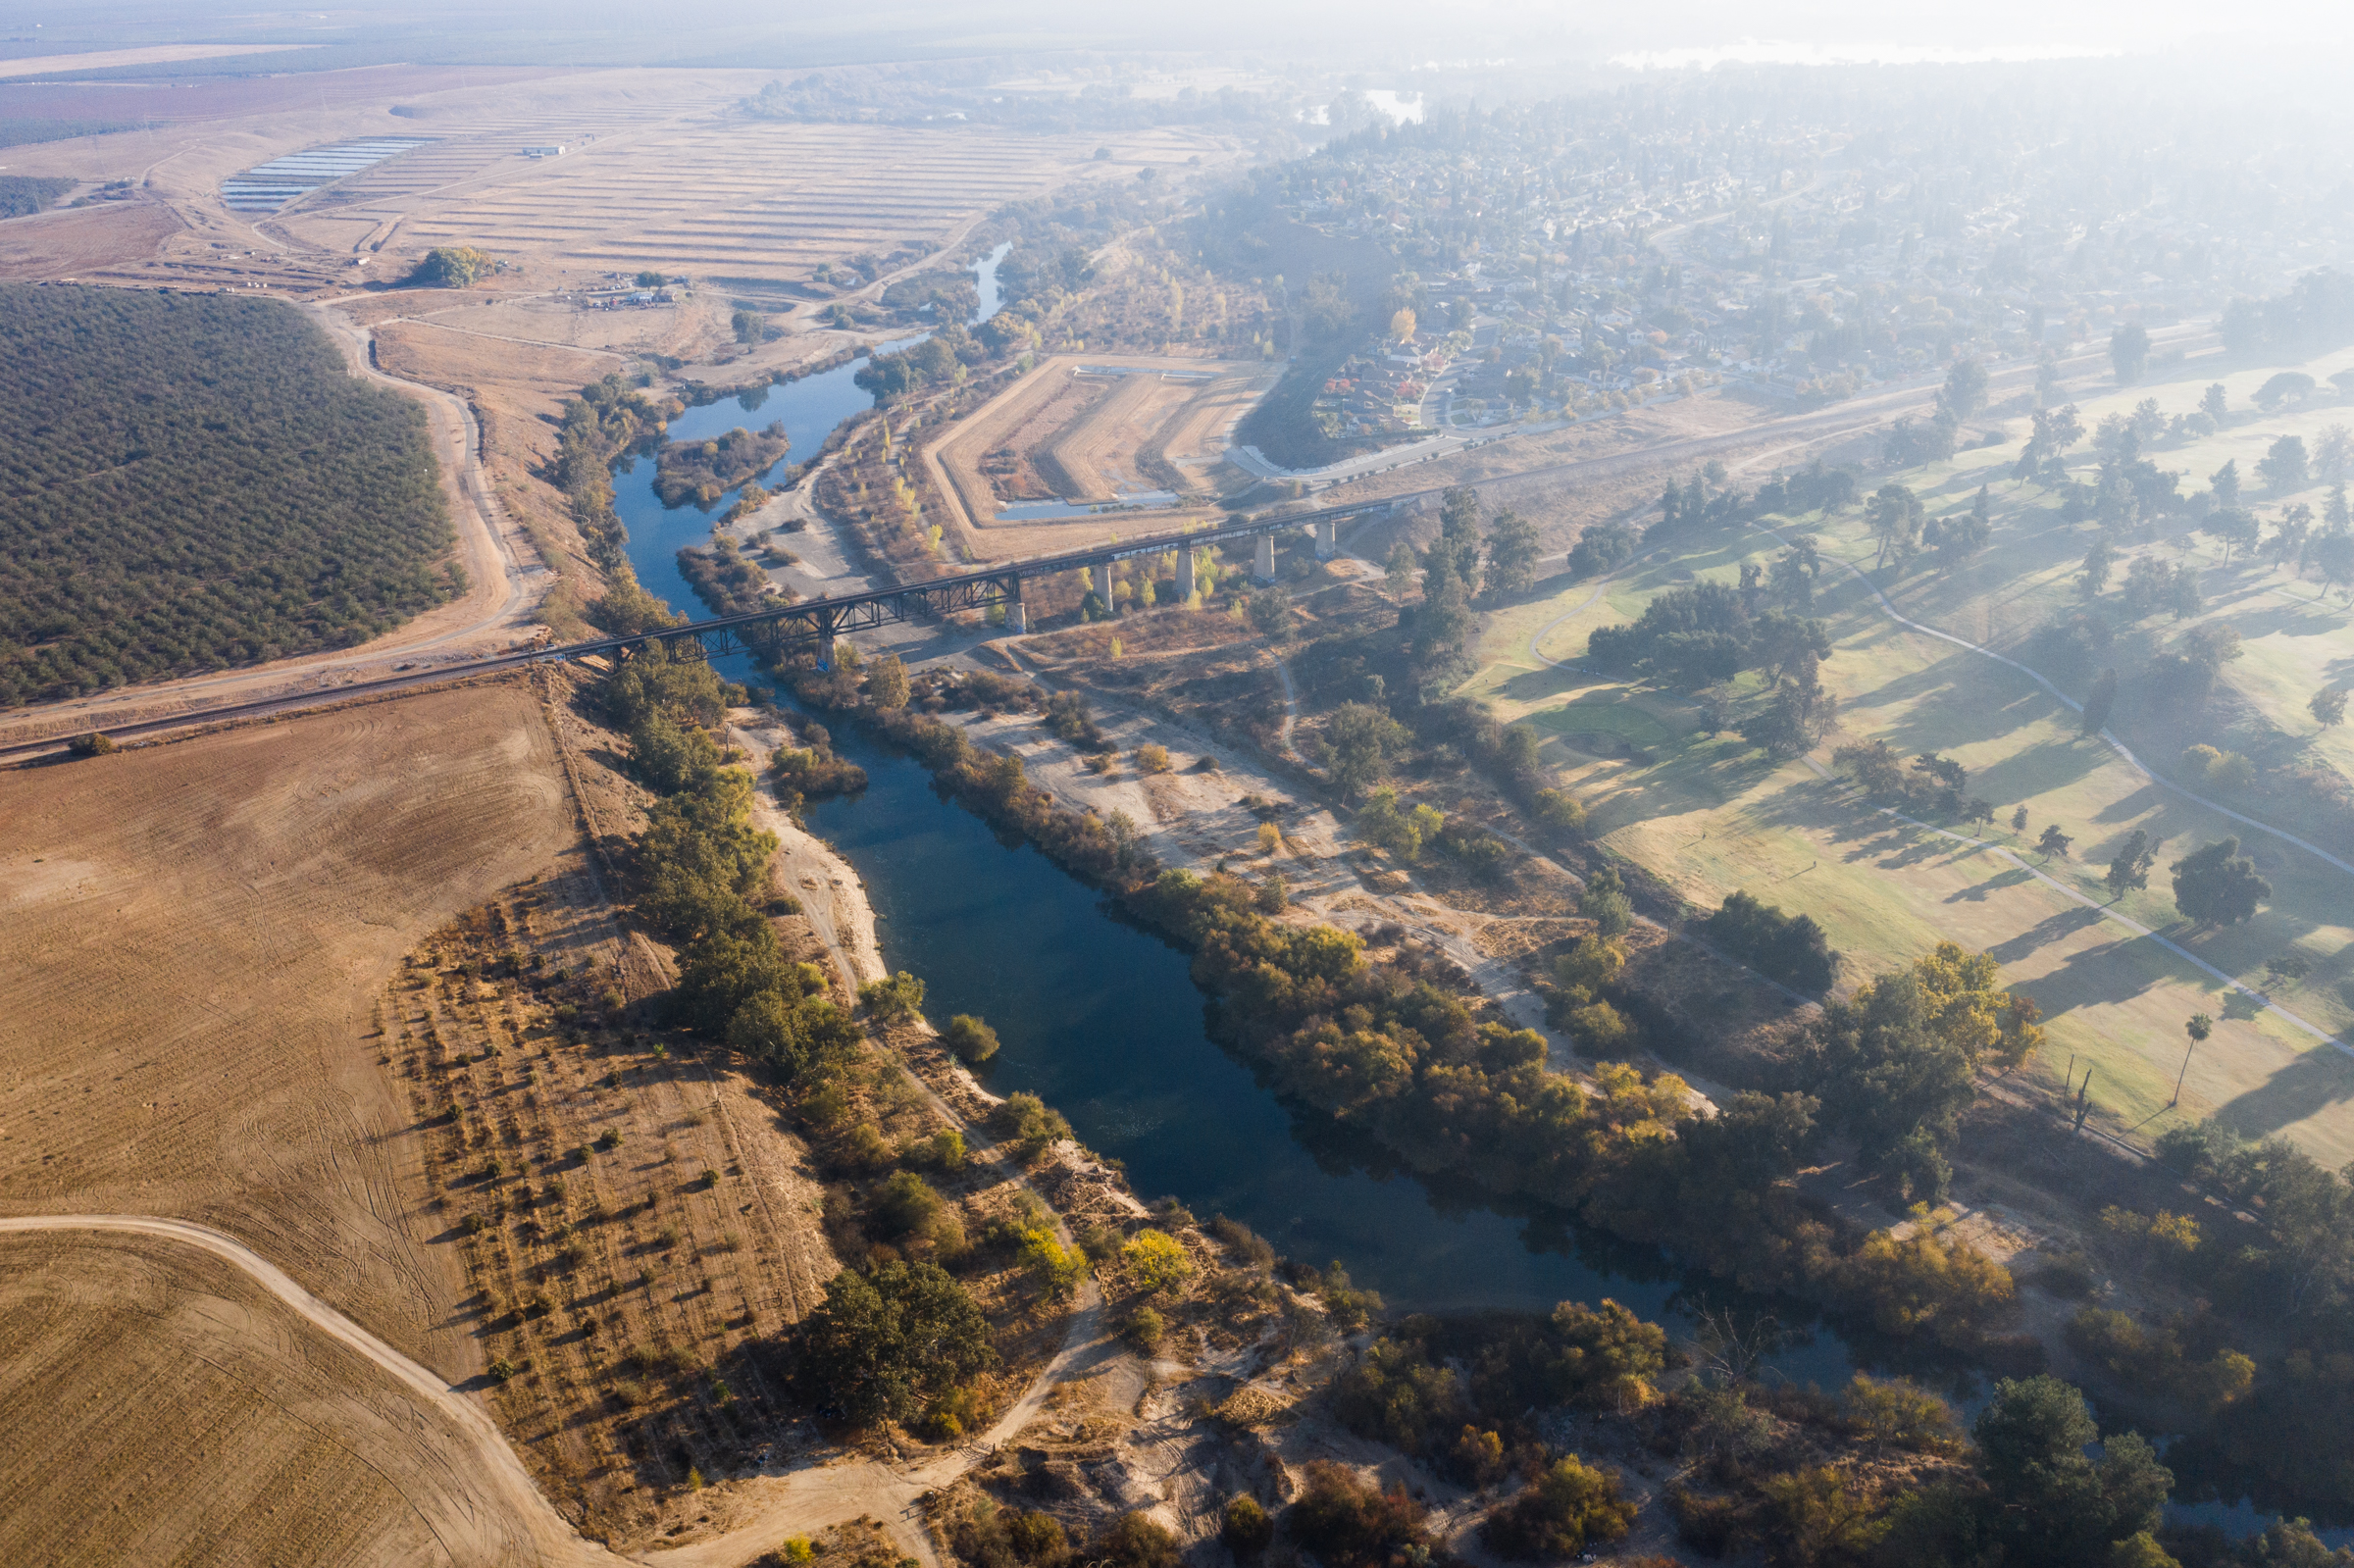 An aerial scene showing the curve of the San Joaquin River cutting between Fresno and Madera